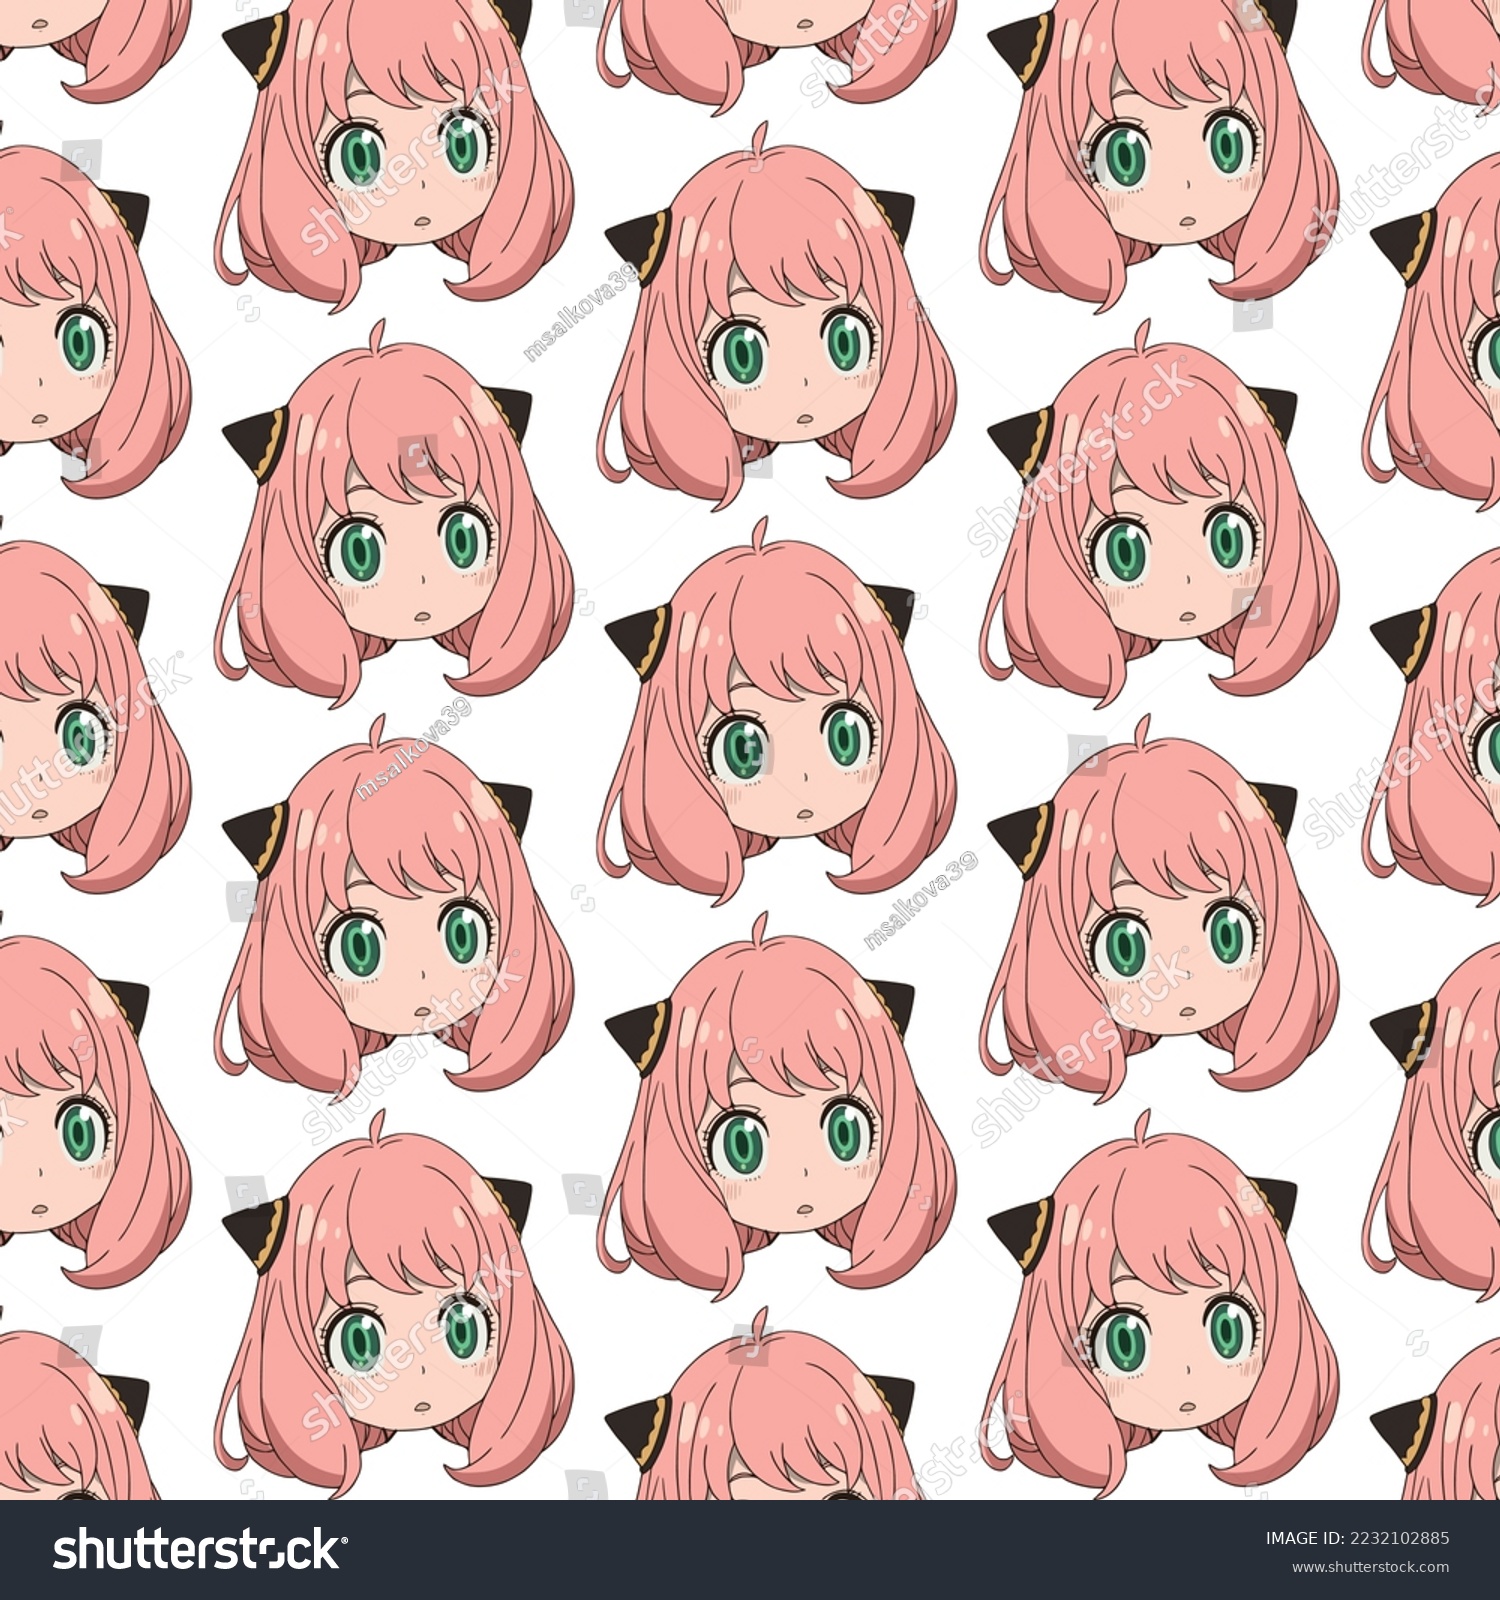 SVG of Surprised girl with wide open eyes, pink blush on her cheeks, the girl has ears and lush pink hair, only a head without a body, pattern svg